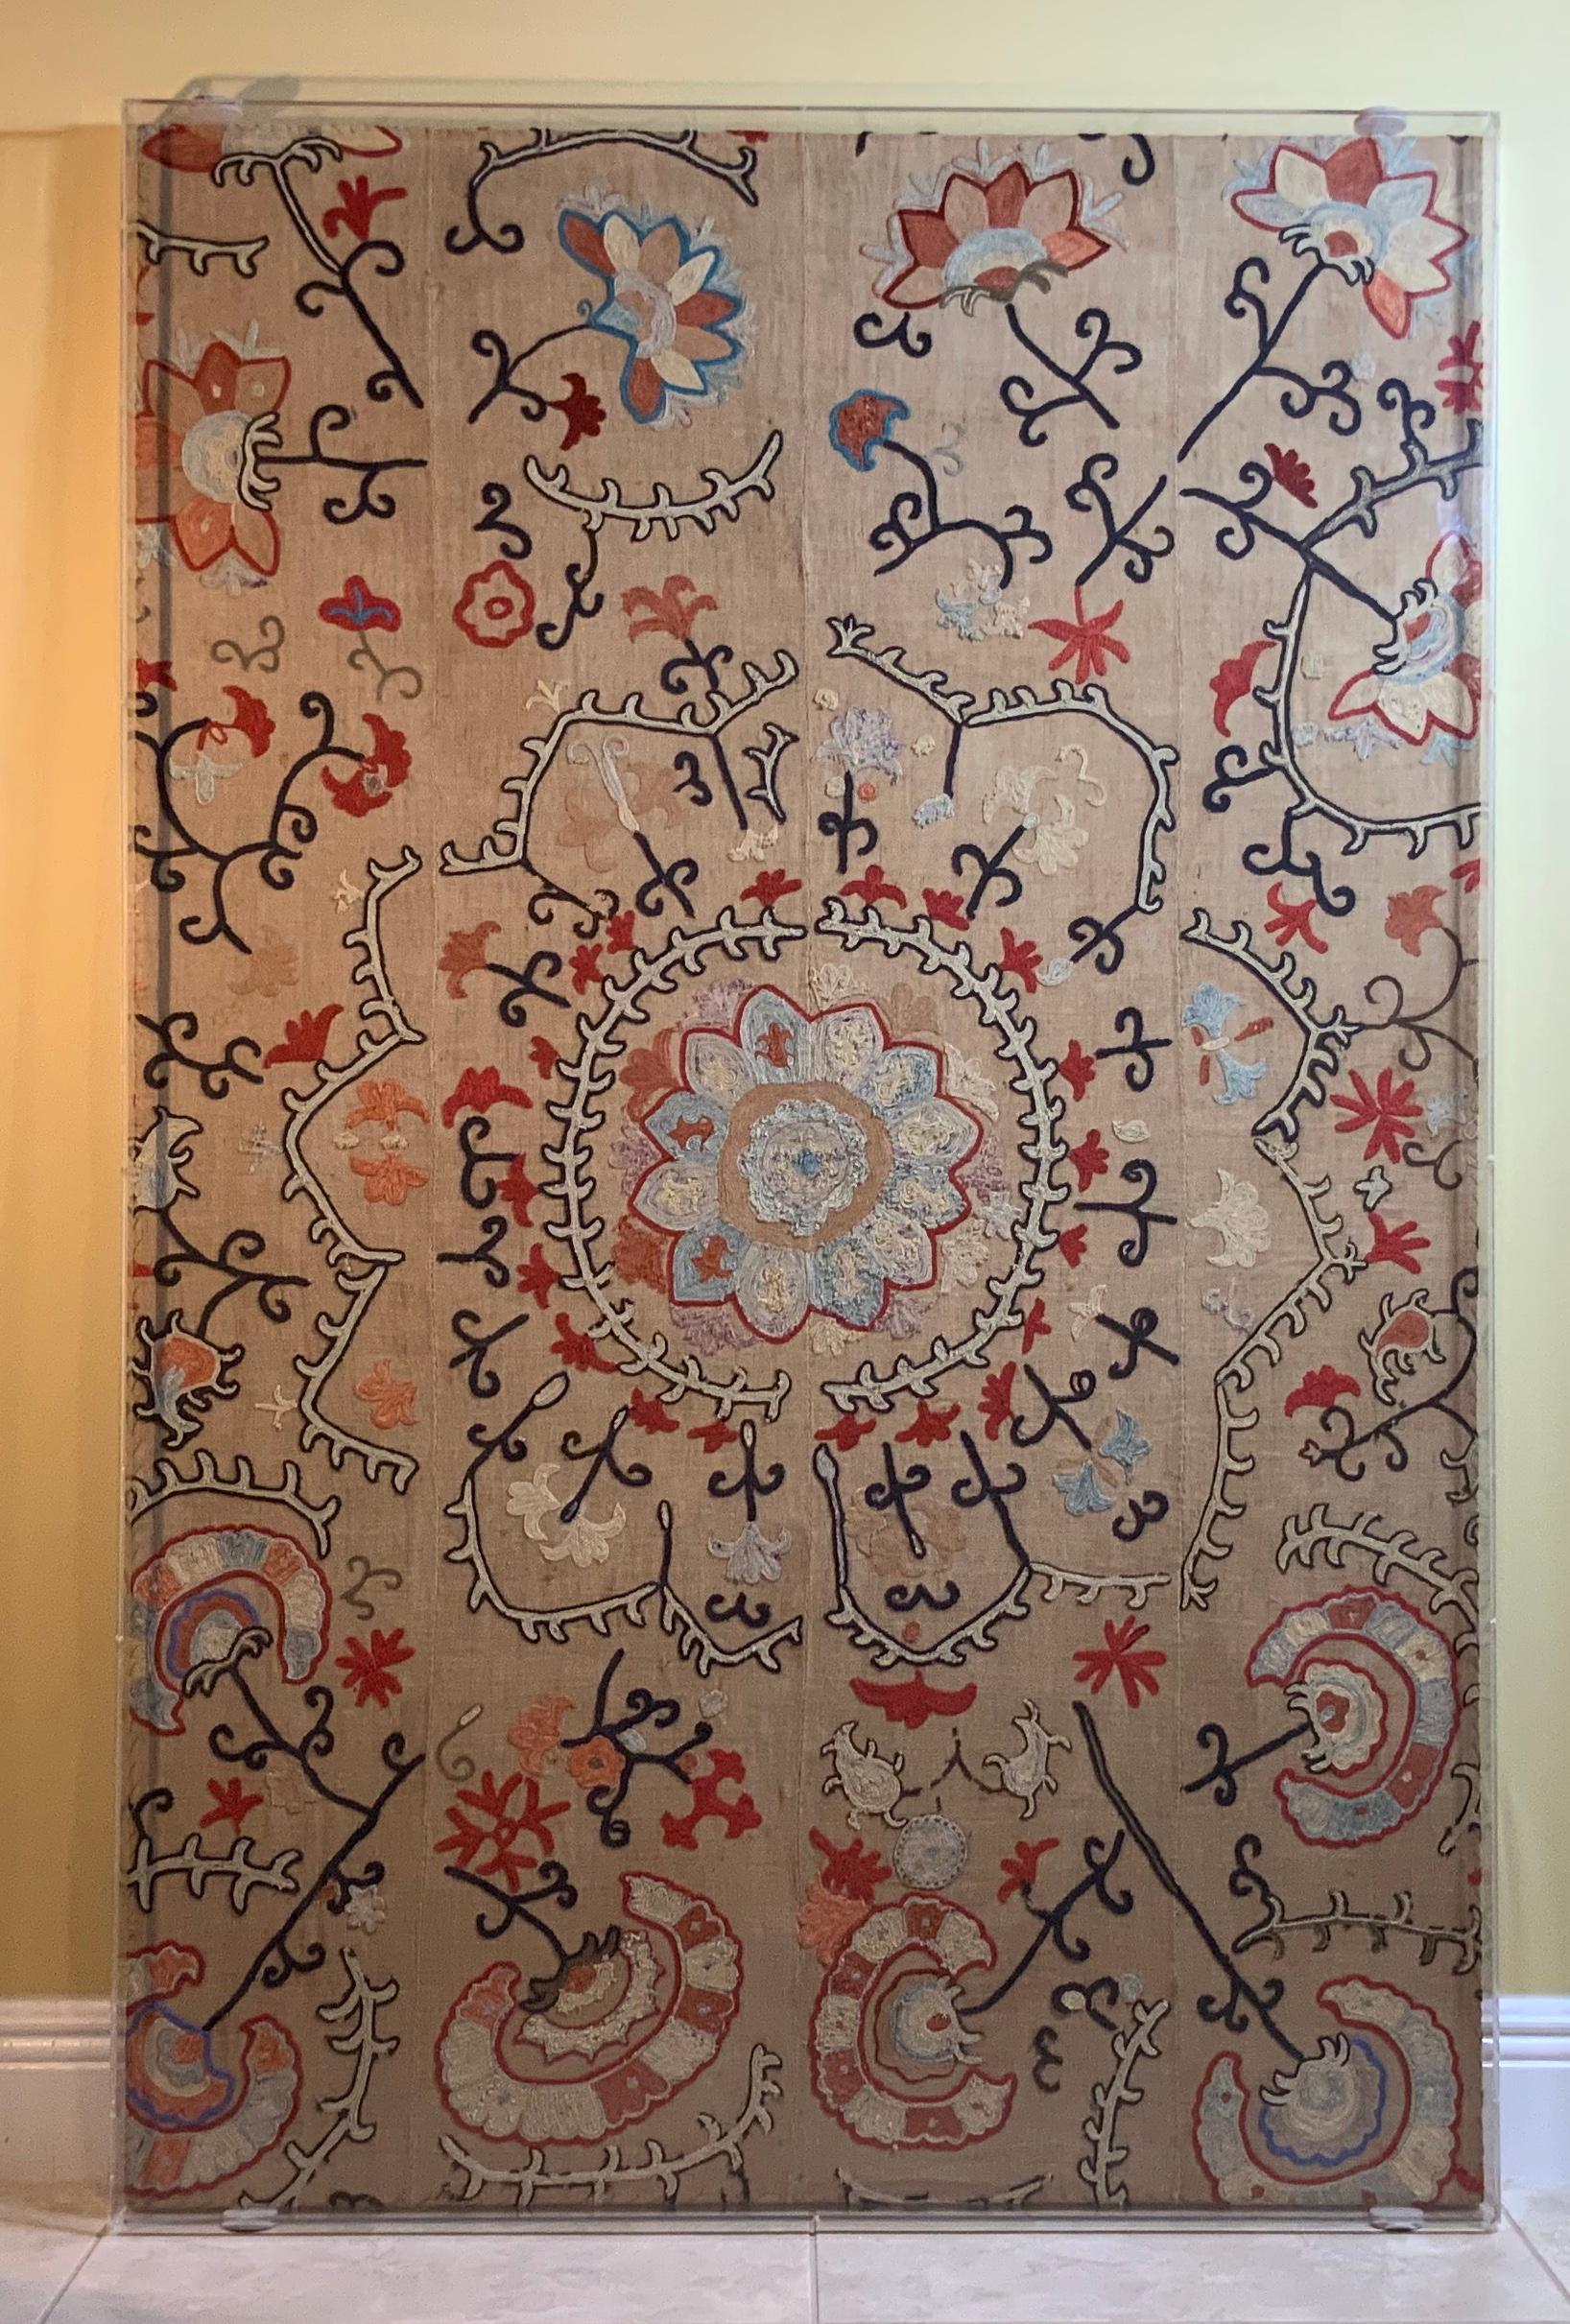 Beautiful antique Suzani textile embroidery made by nomadic tribe as a show the mastery of the art of Asian embroidery. Some oxidization duo to age see photo’s.
All professionally mount by sewing this textiles to linen backing and display them in a